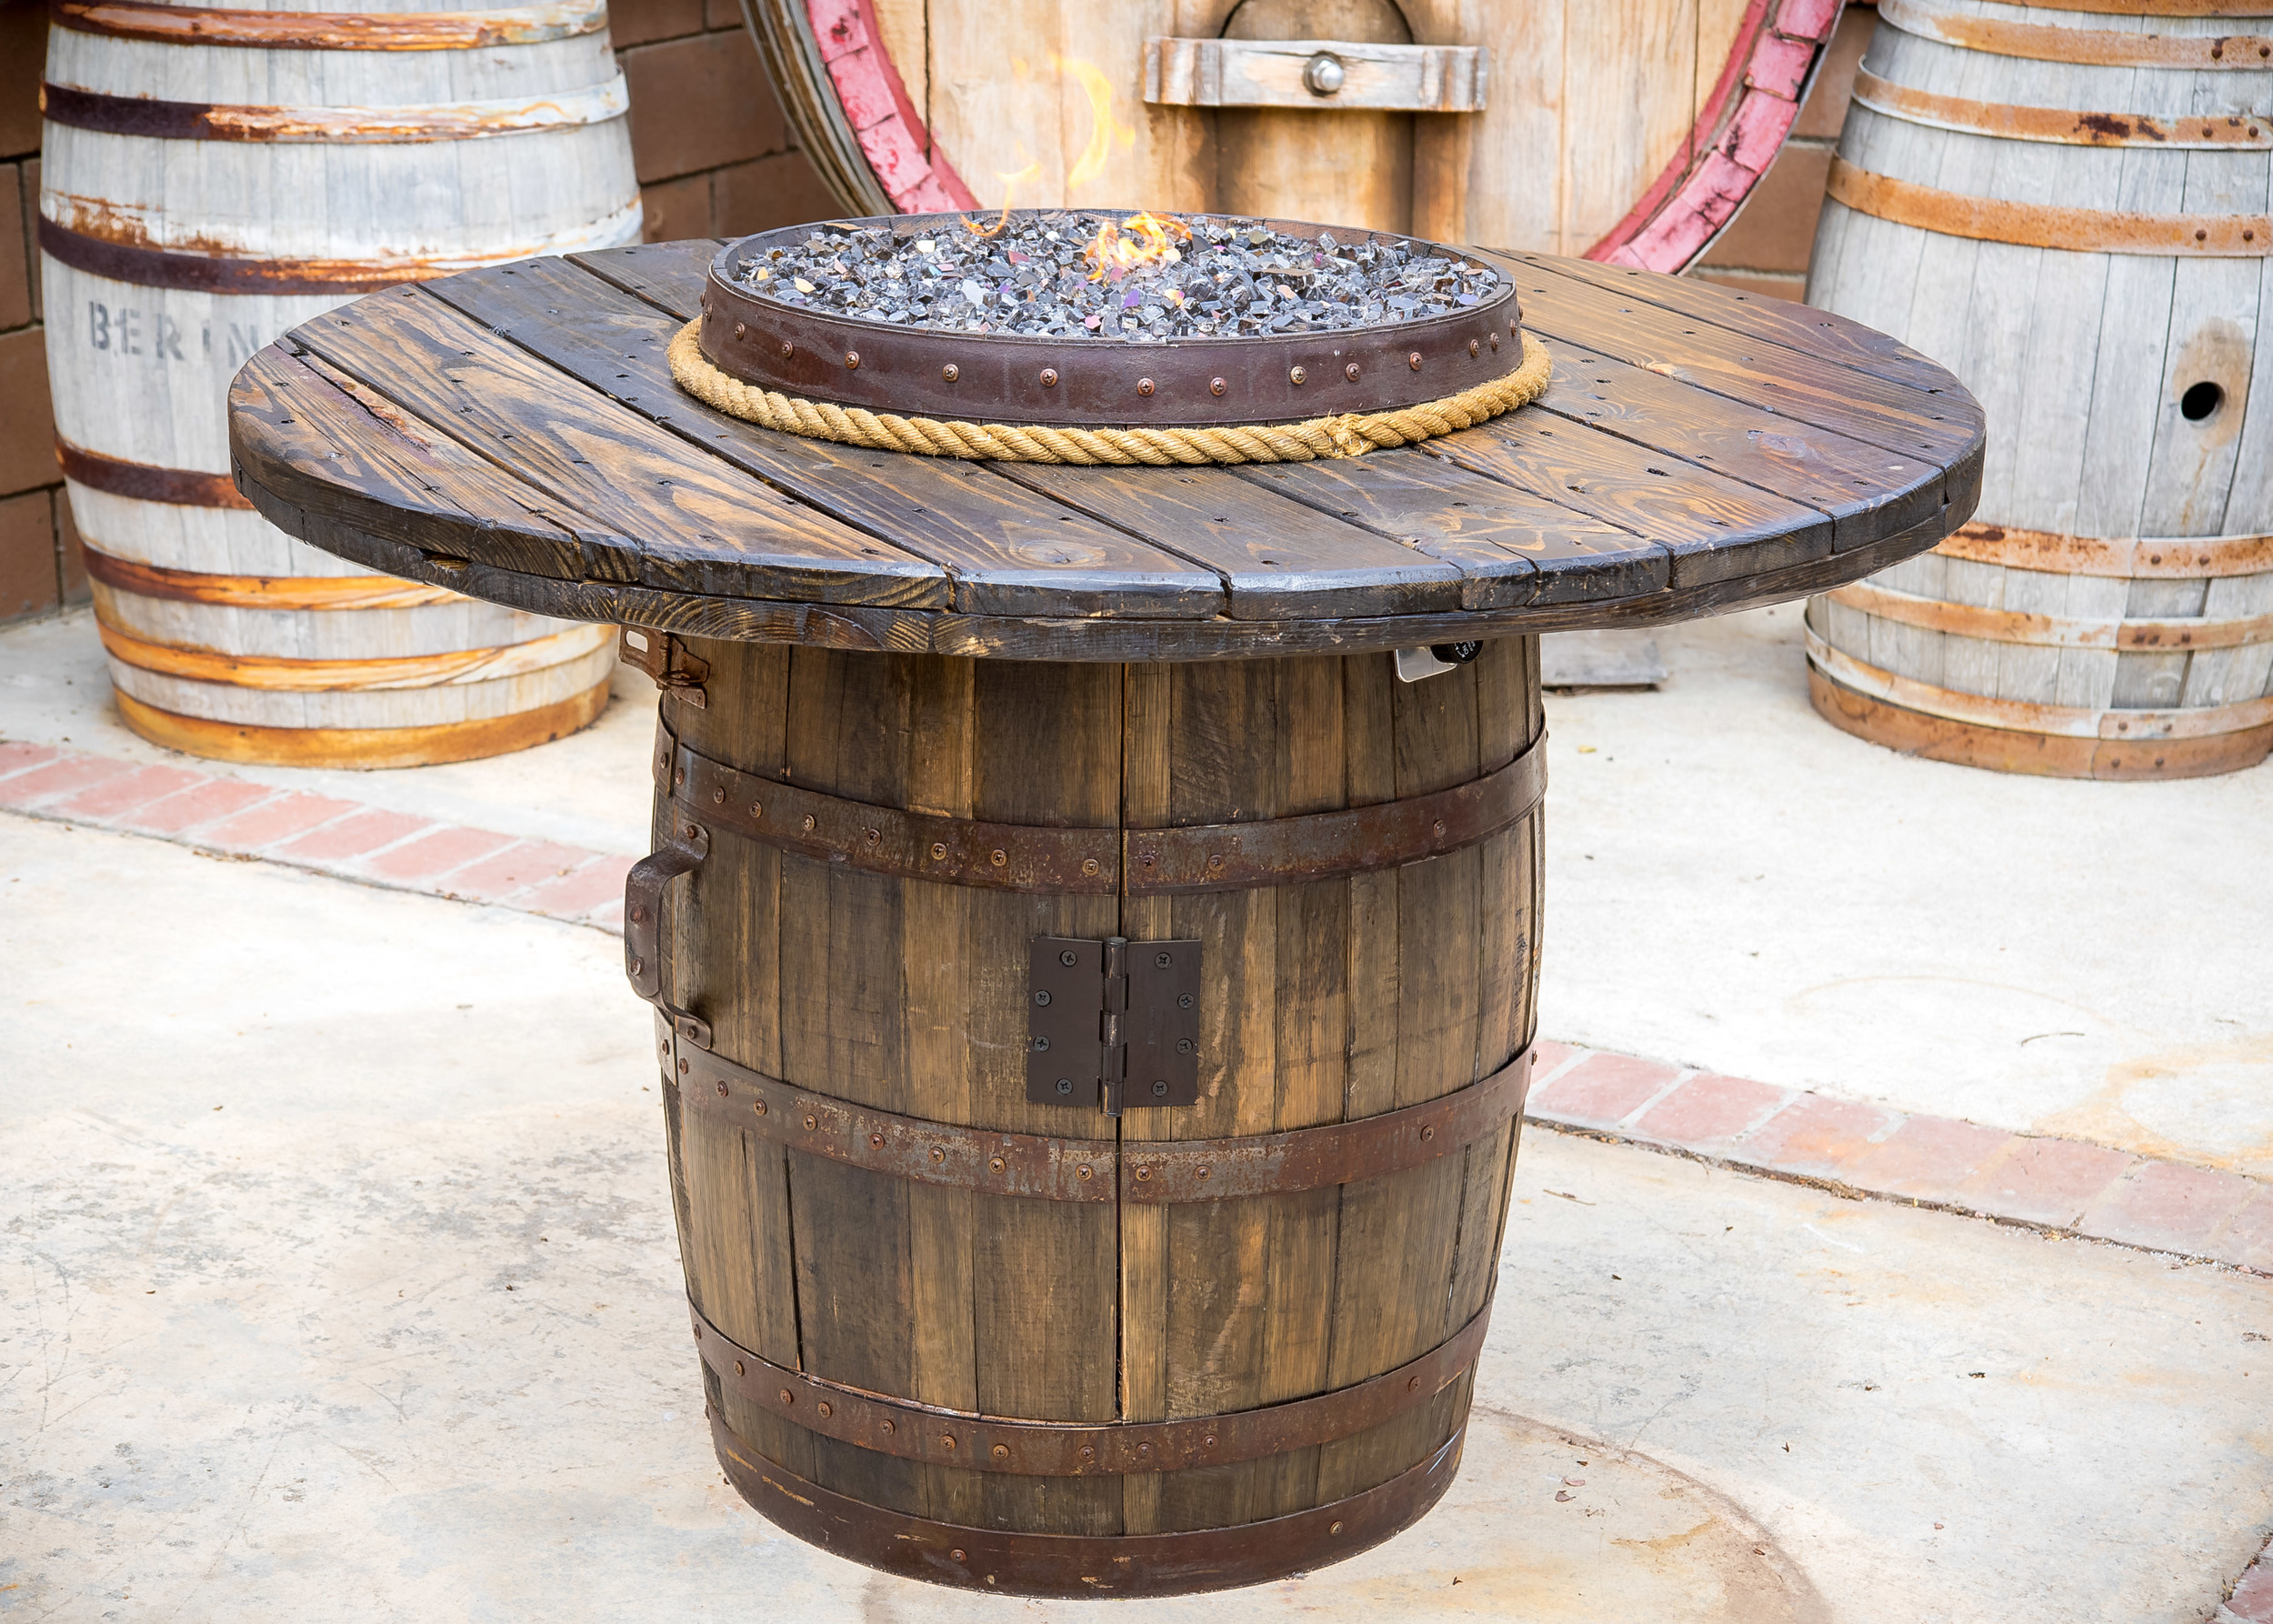 Fuego Fire Pit King Barrel, Fuego Fire Pit